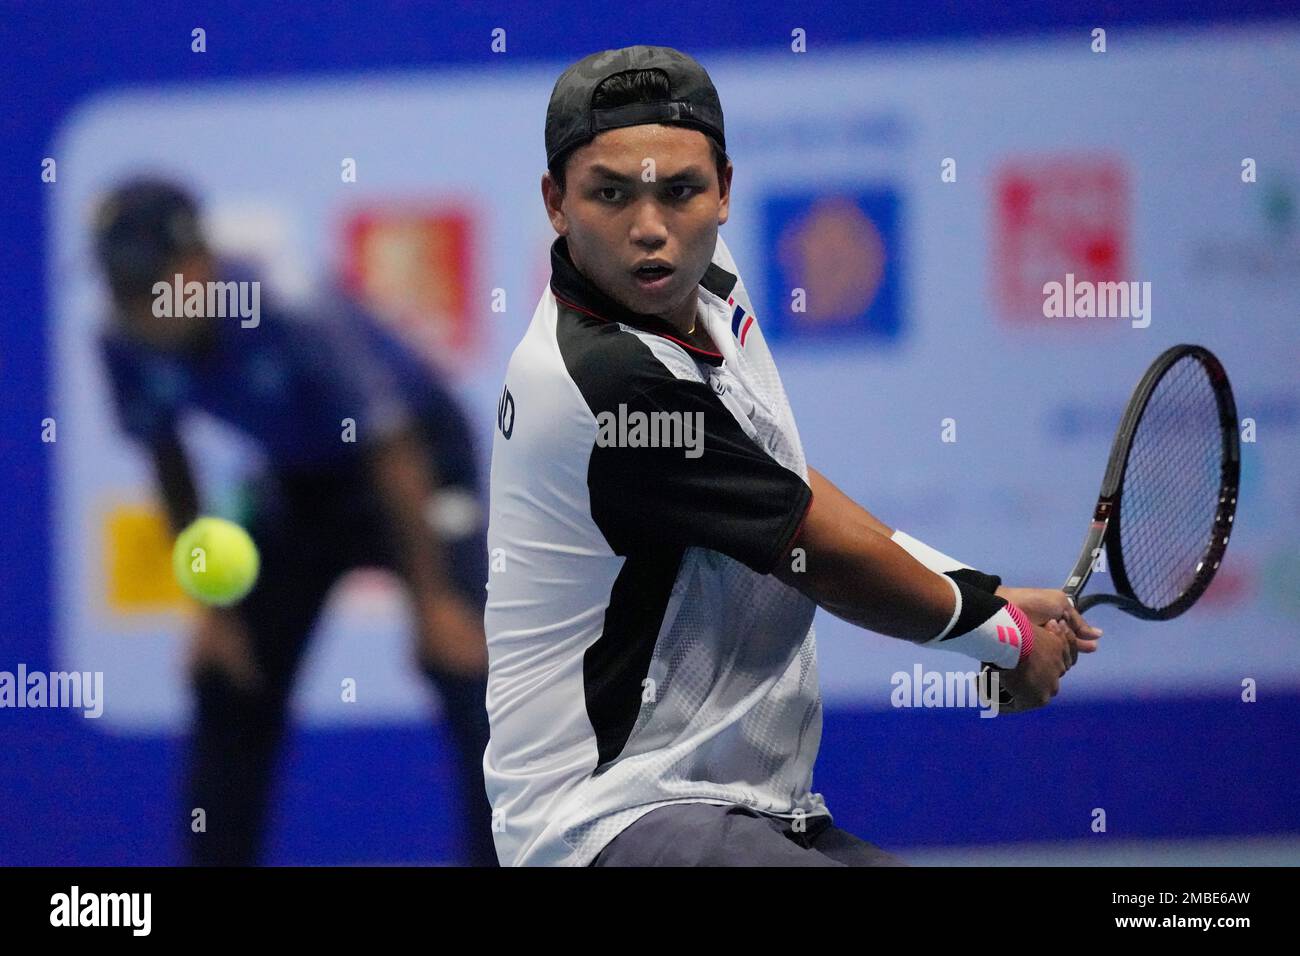 Yuttana Charoenphon of Thailand returns a ball to Nam Hoang Ly of Vietnam during their mens singles semi-final tennis match at the 31st Southeast Asian Games (SEA Games 31) in Bac Ninh,